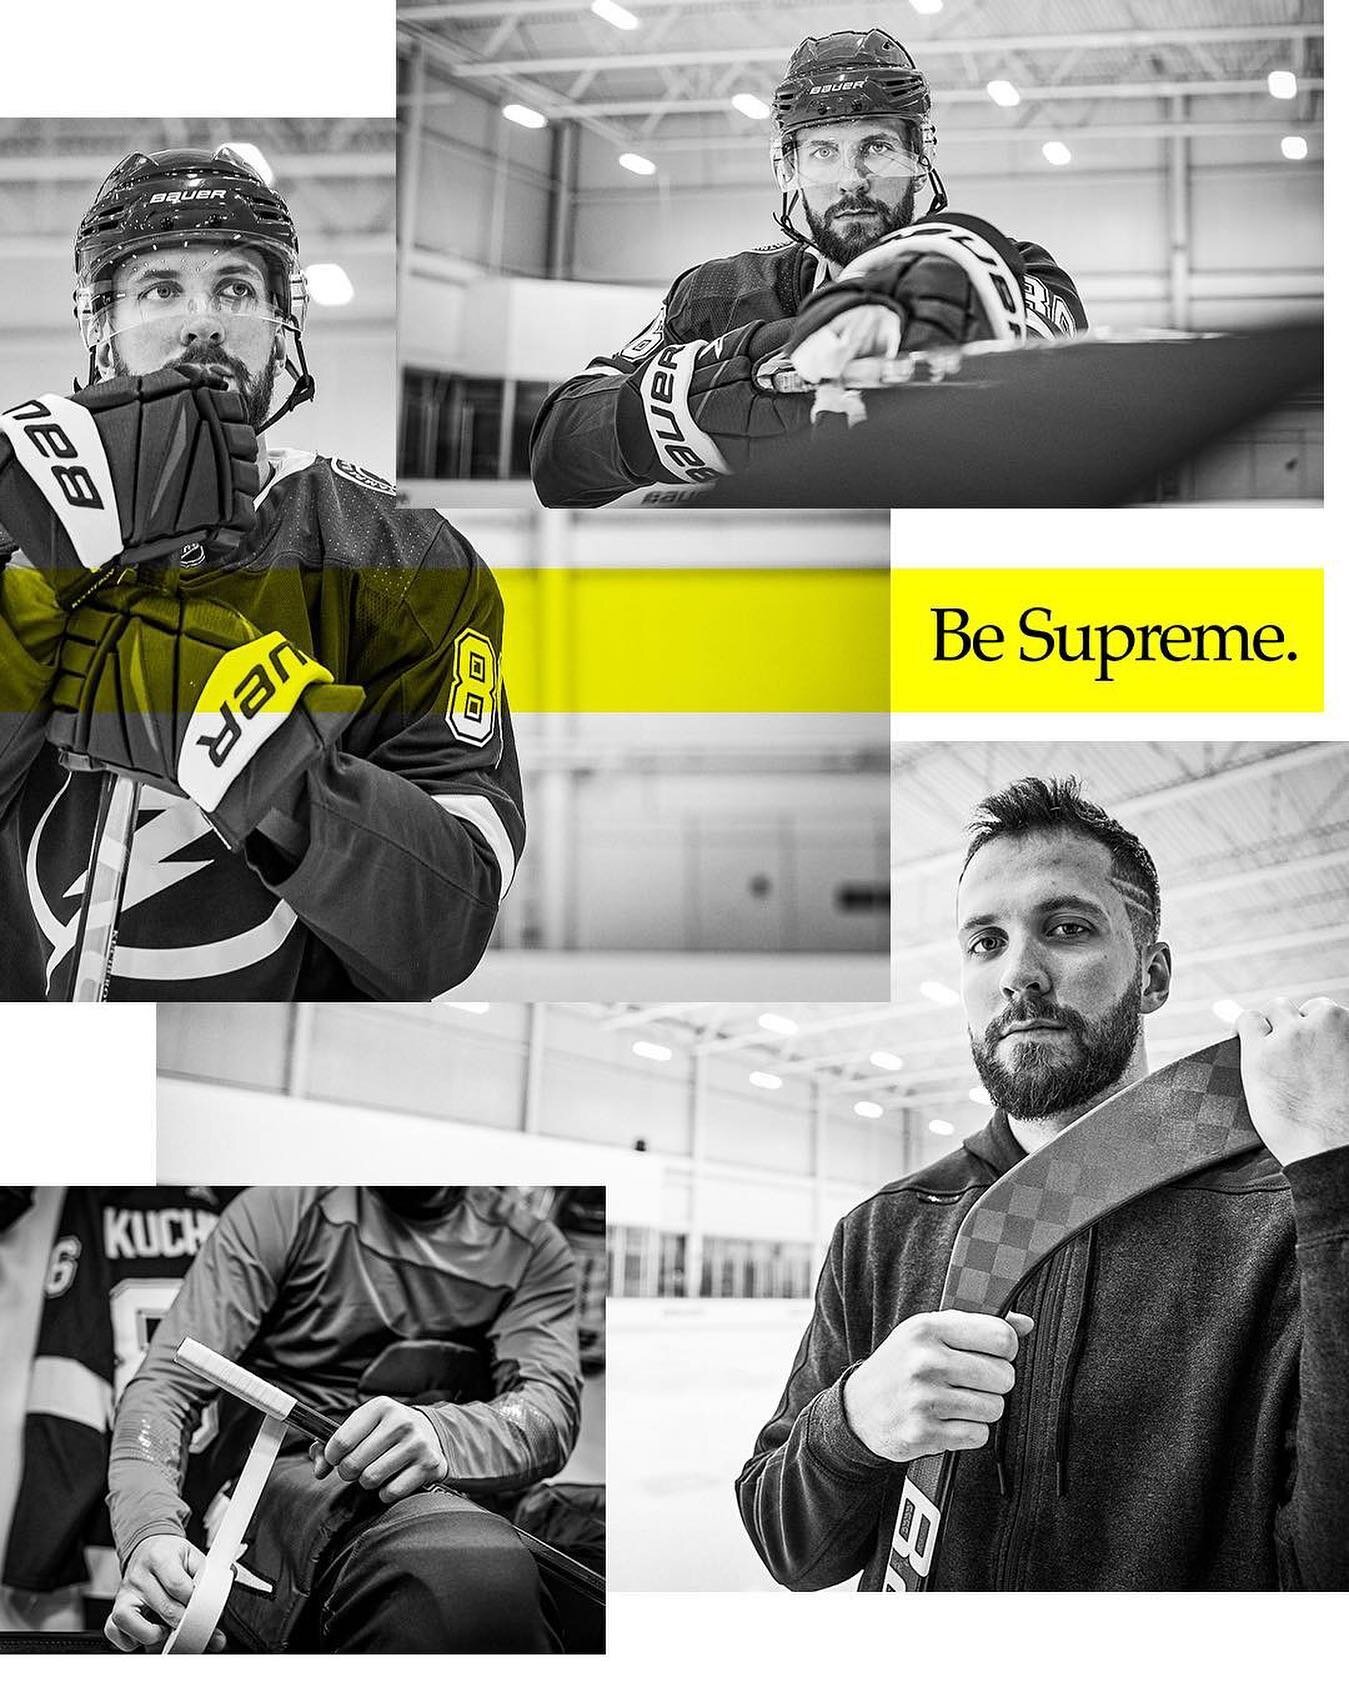 Gear up and go. Game 6. #BeSUPREME
Will the Lightning close things out tonight, or do the Islanders force a Game 7?